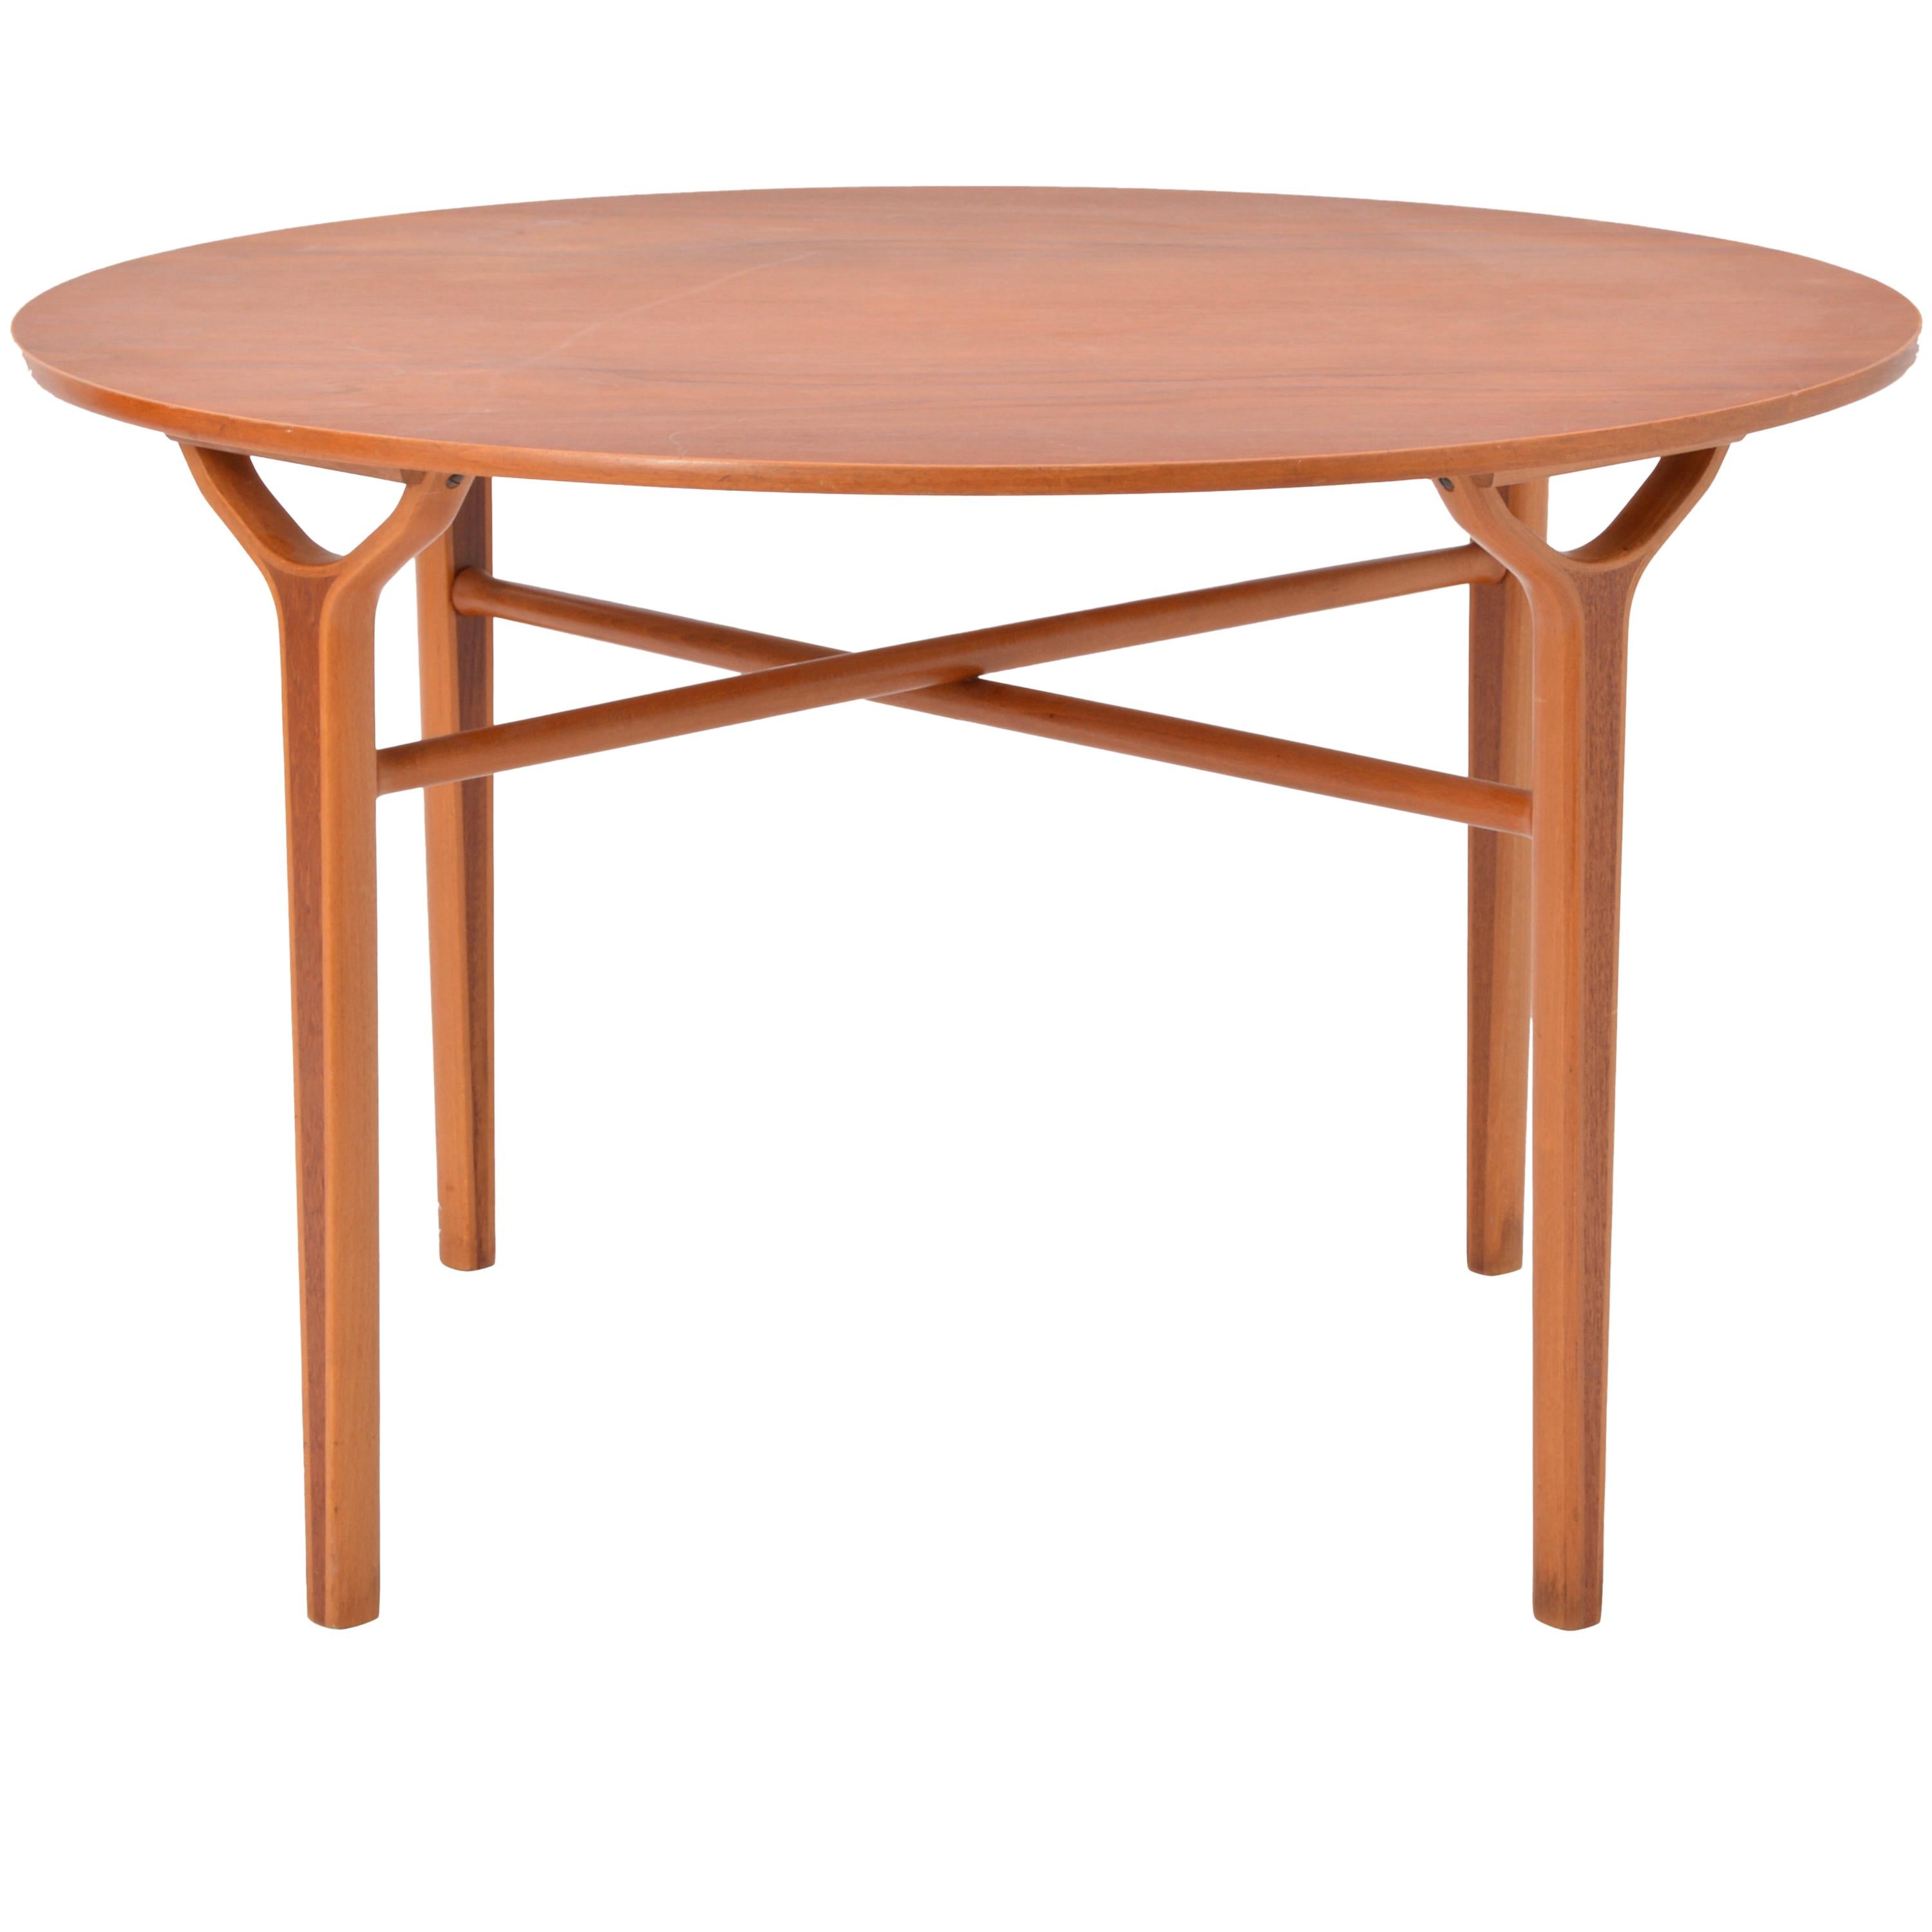 Danish Mid-Century Modern Ax table by Peter Hvidt and Orla Mølgaard-Nielsen